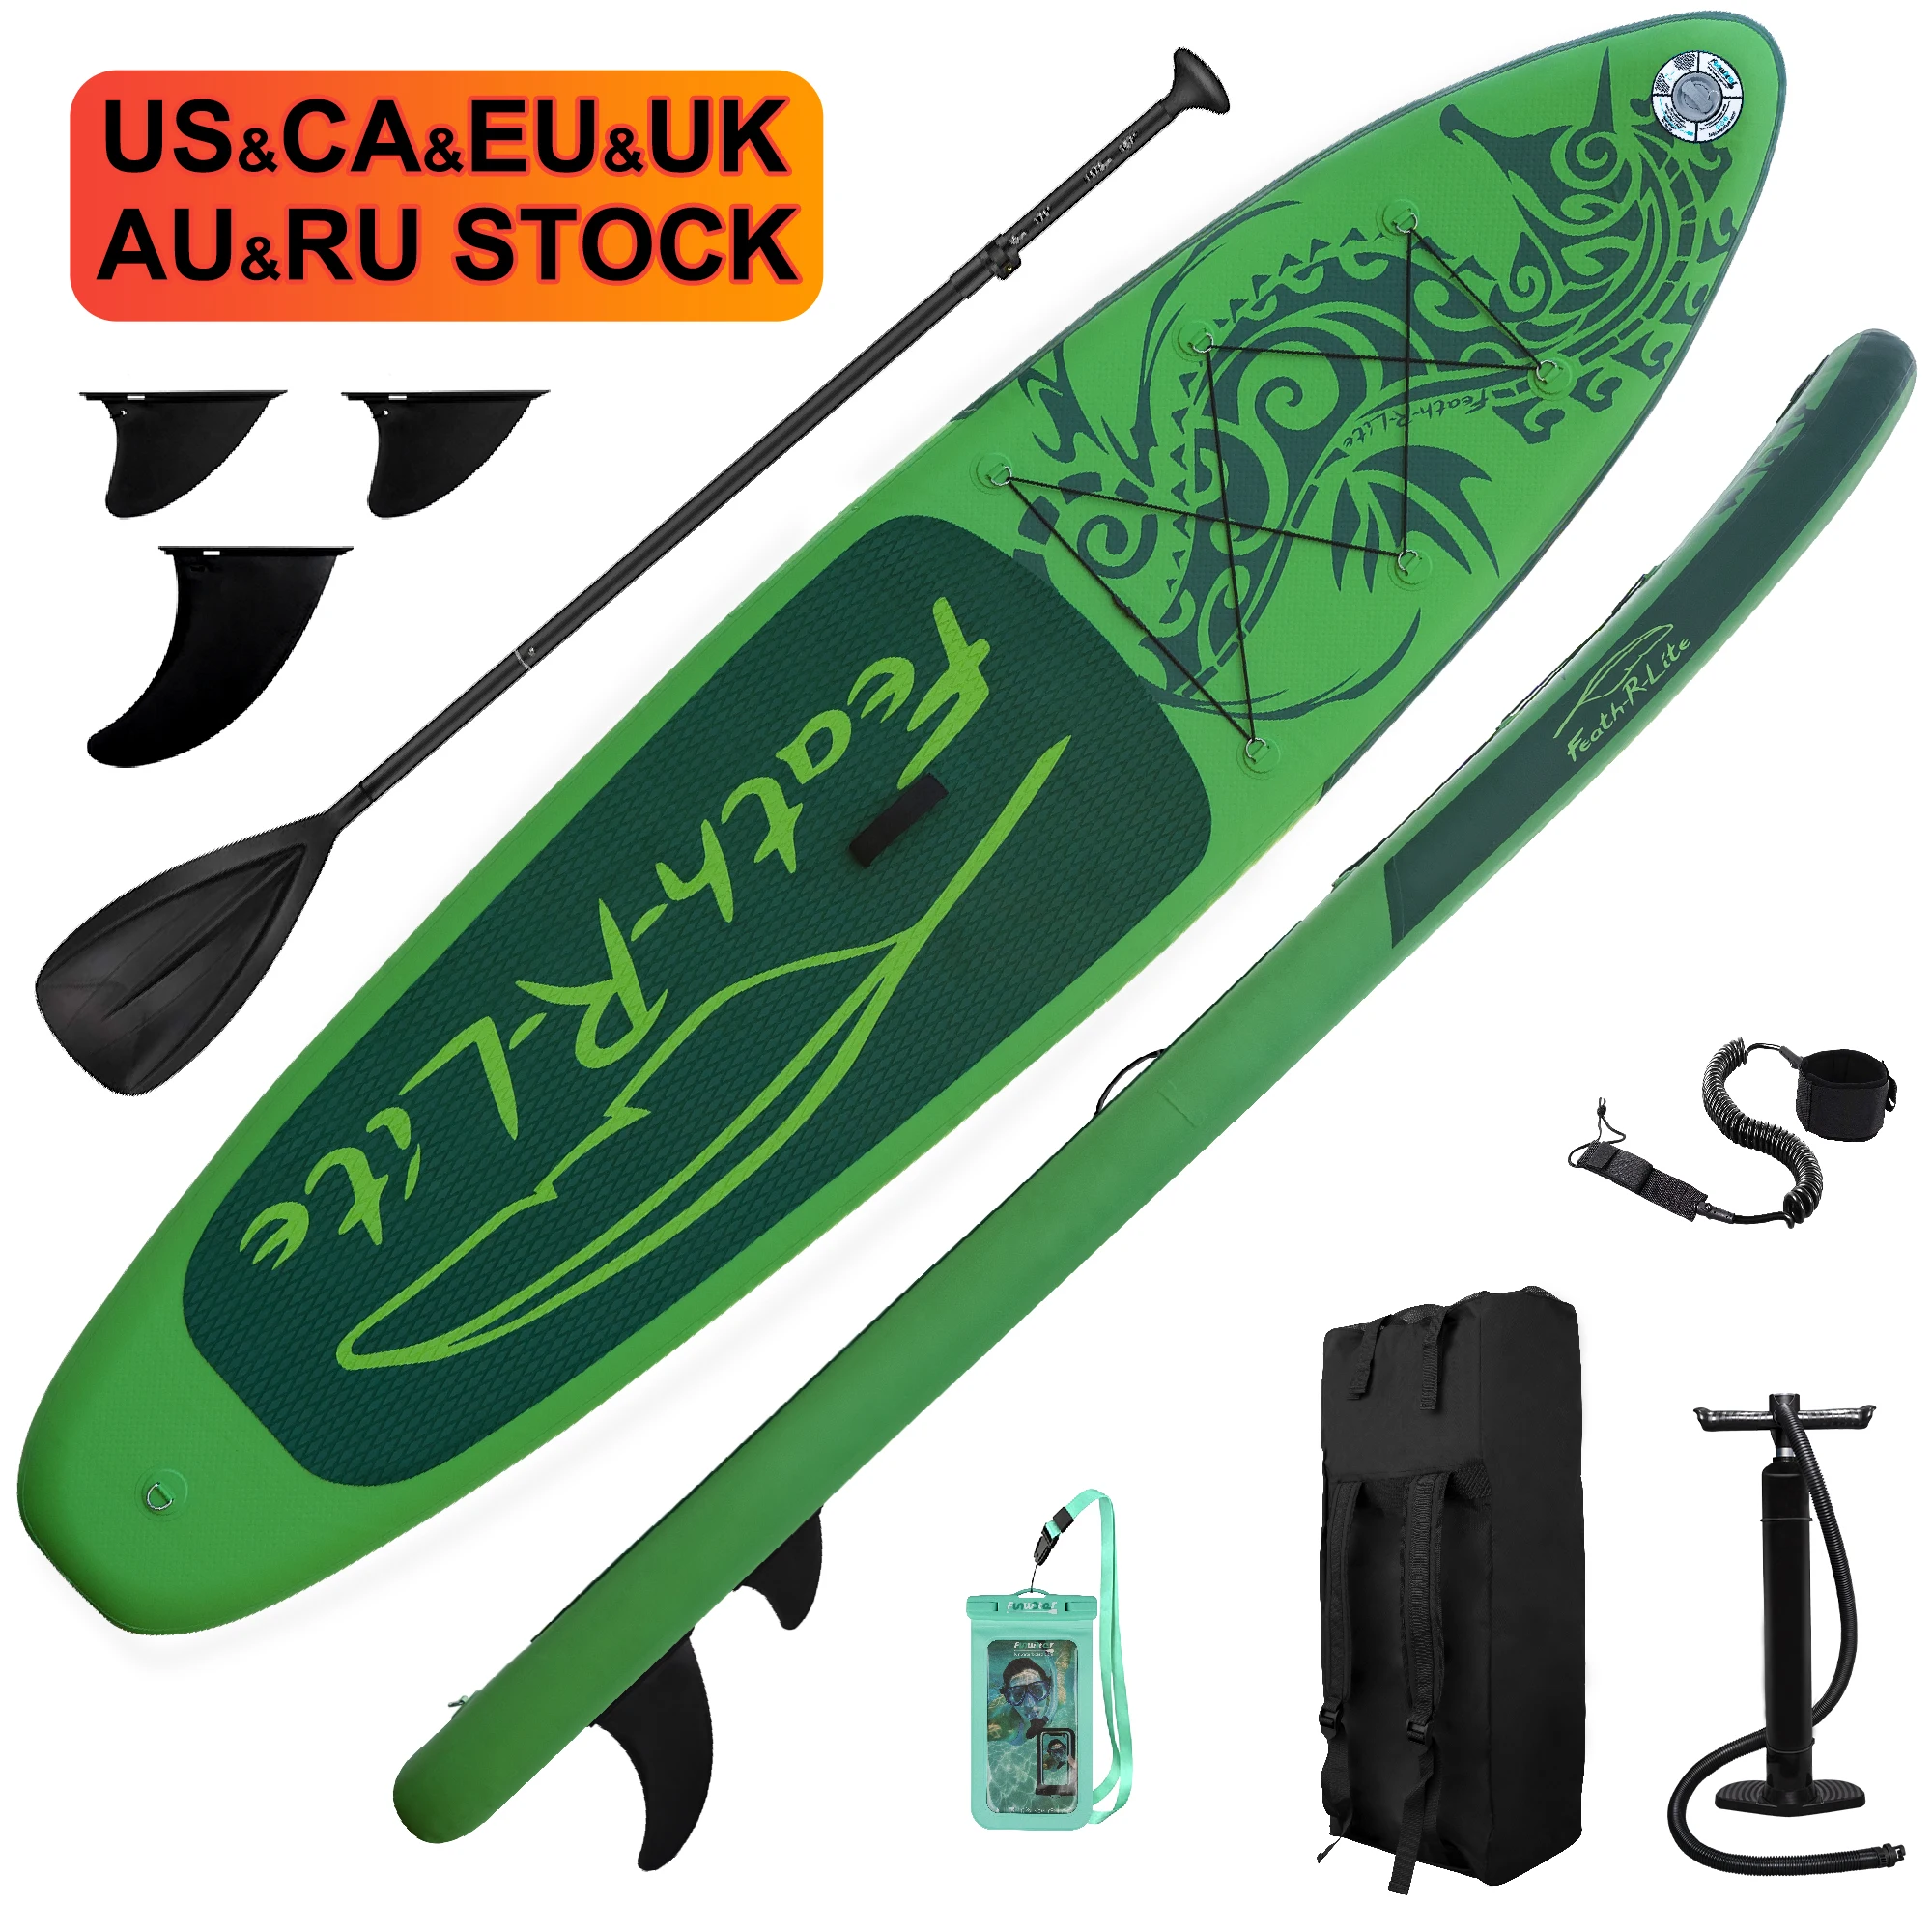 

FUNWATER Dropshipping OEM 10'6" superfield tablas paddle surf surfboards for sale paddle board pump sup surfing